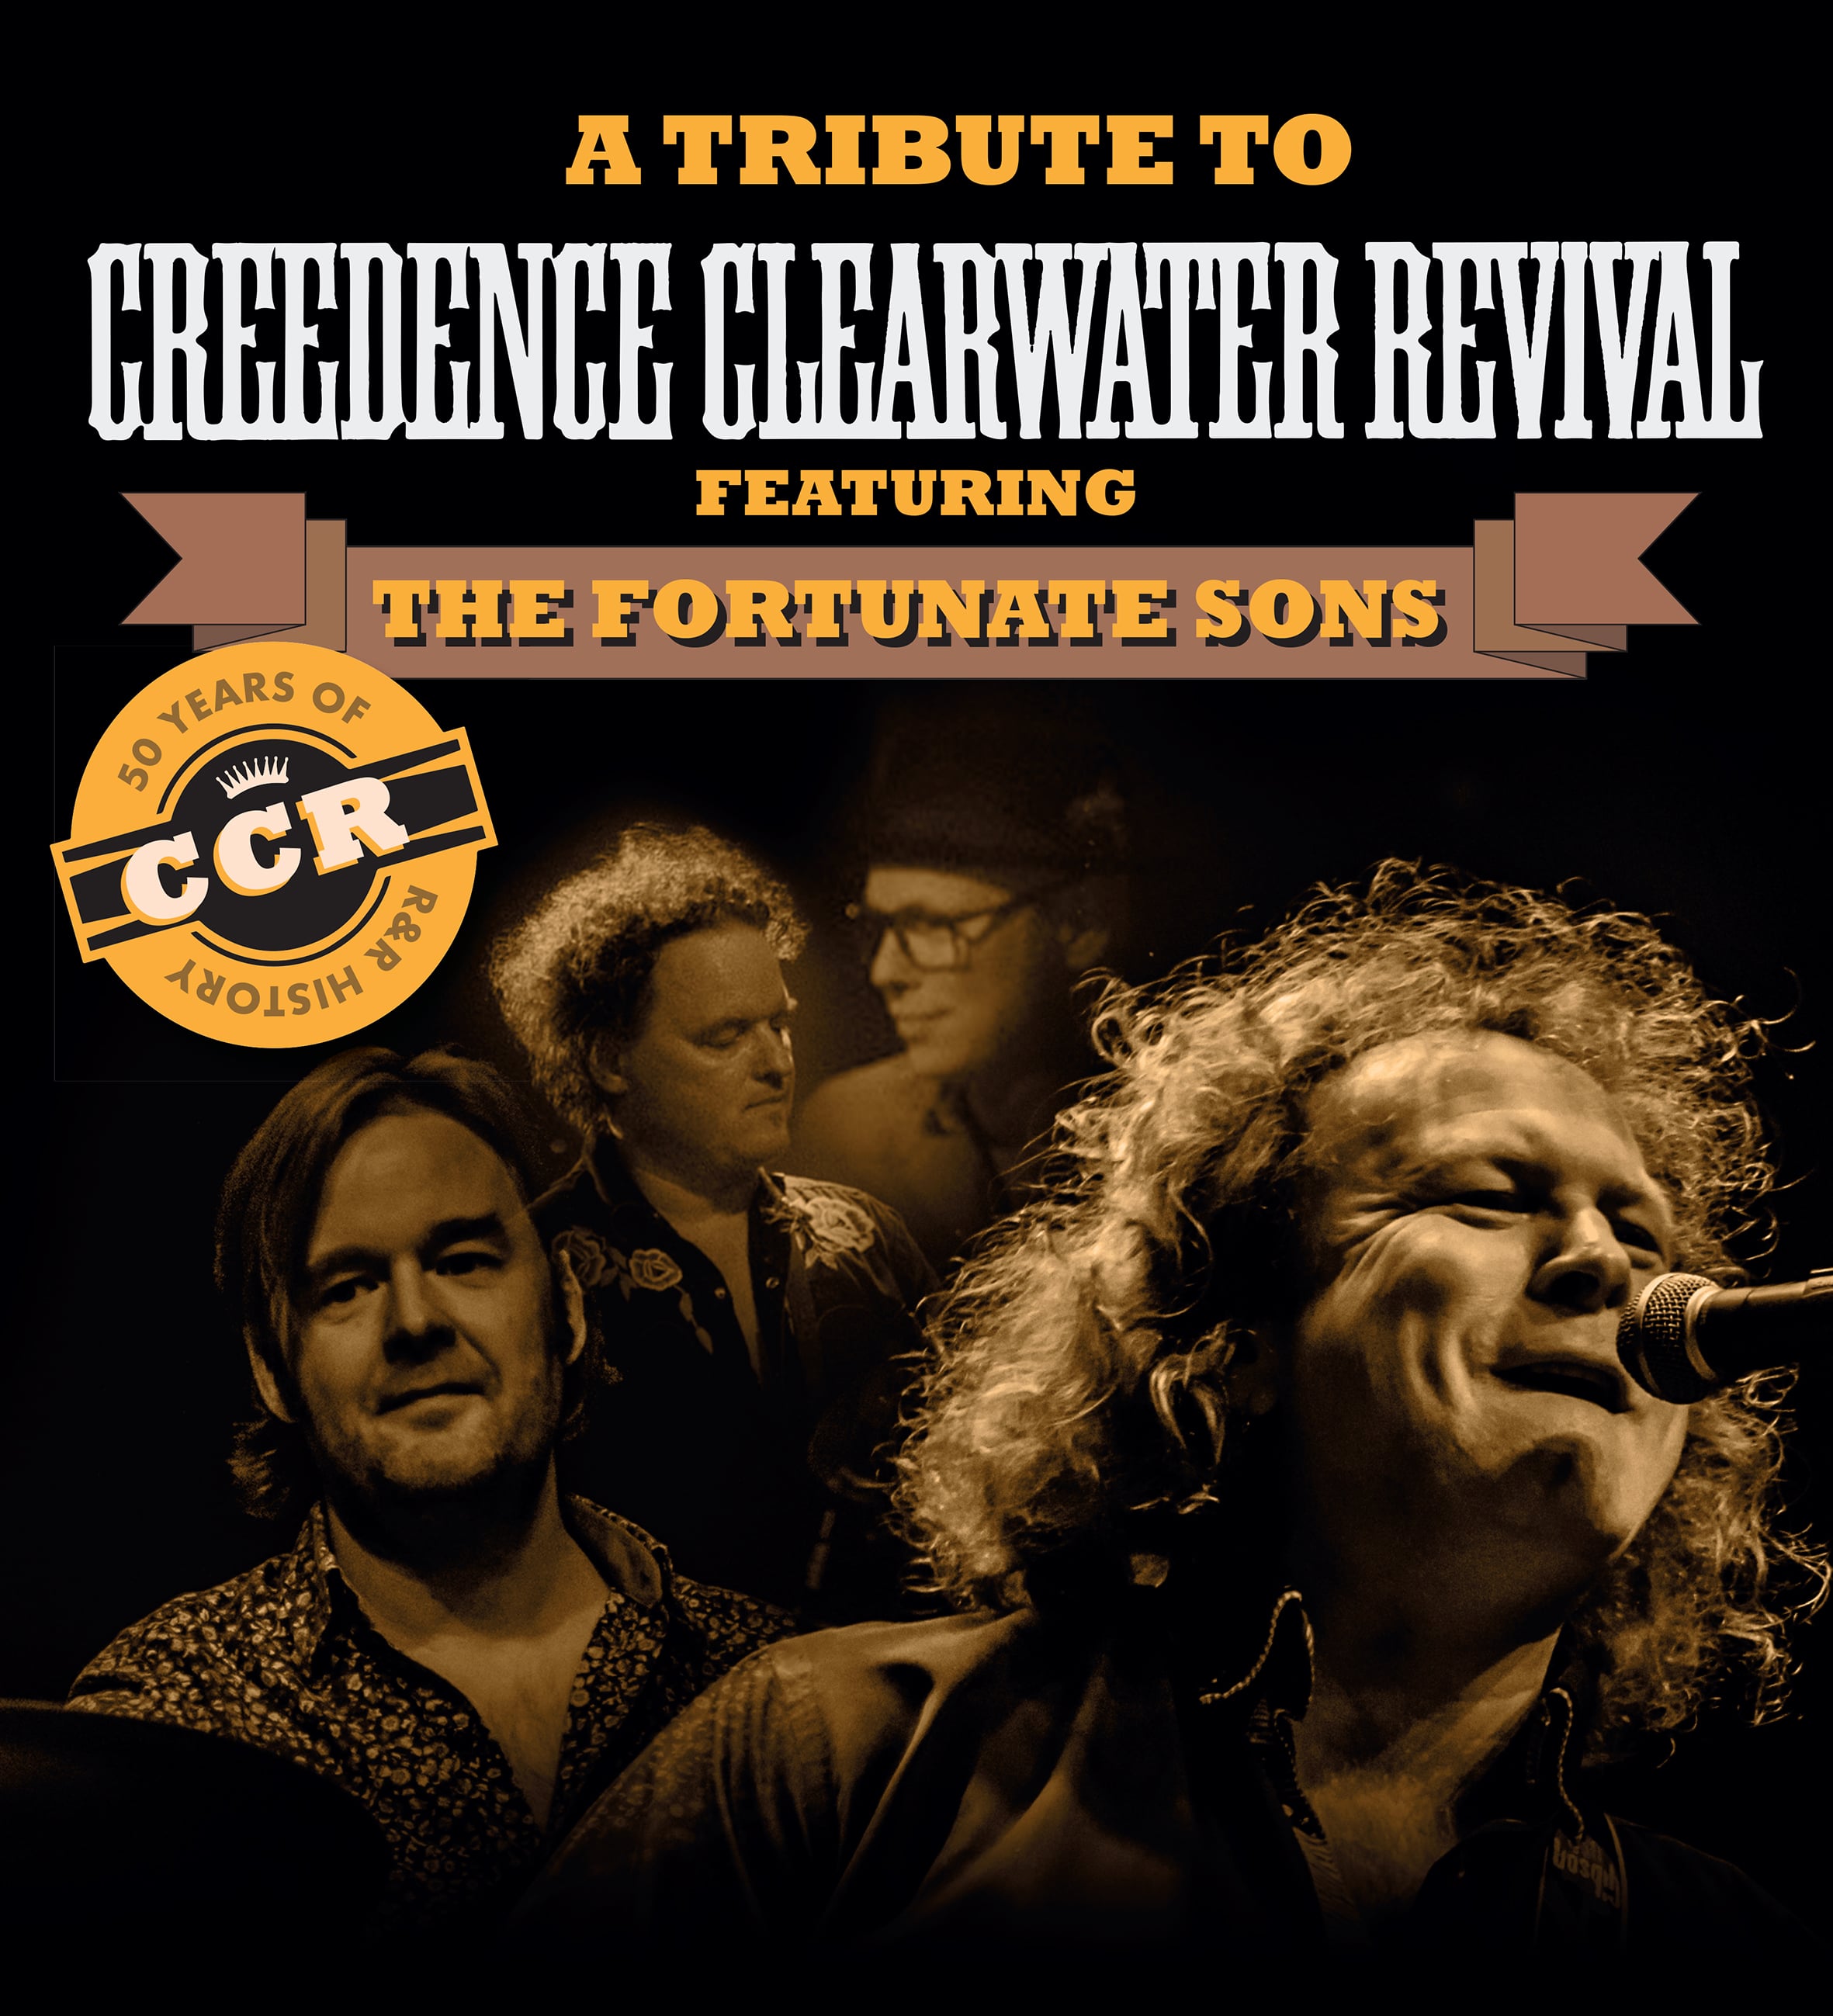 The Fortunate Sons - "CCR" 50 years of Rock 'n Roll History Tour